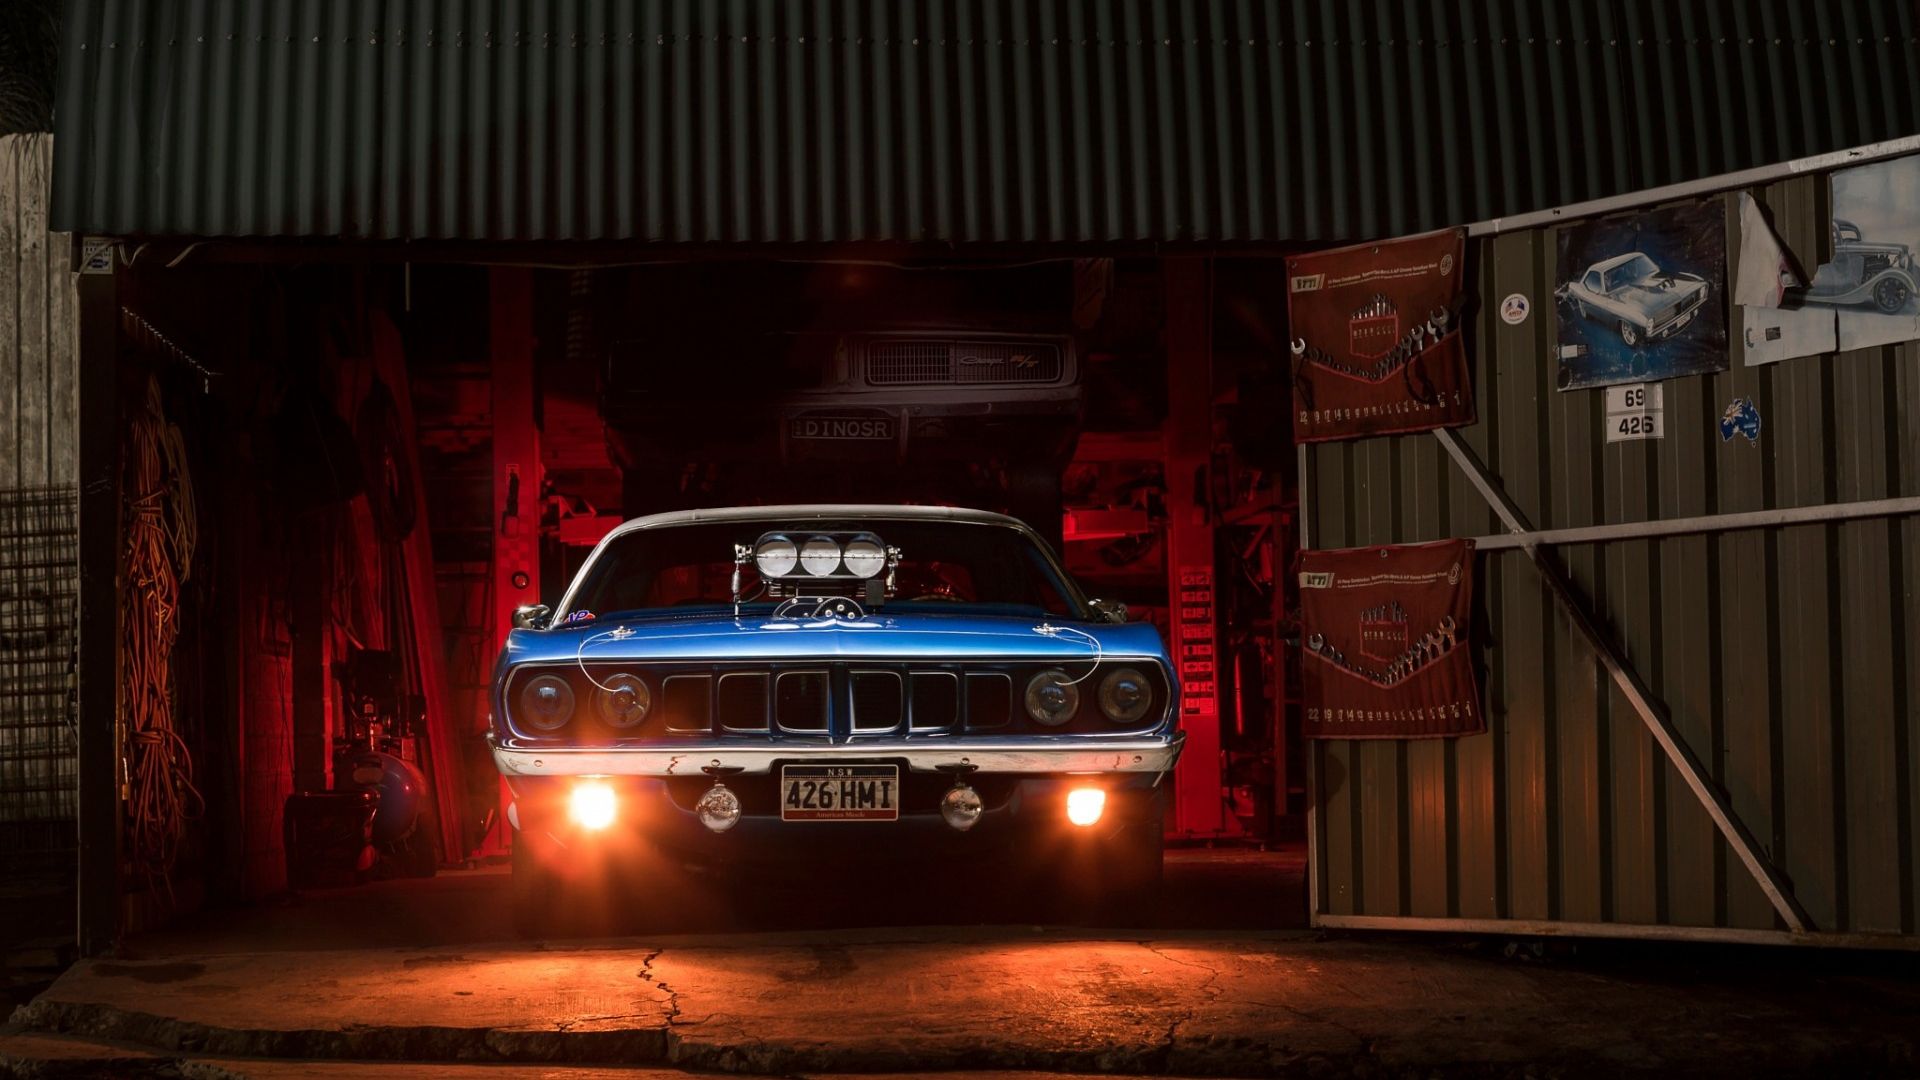 Desktop wallpaper plymouth barracuda classic muscle car garage hd image picture background bdb